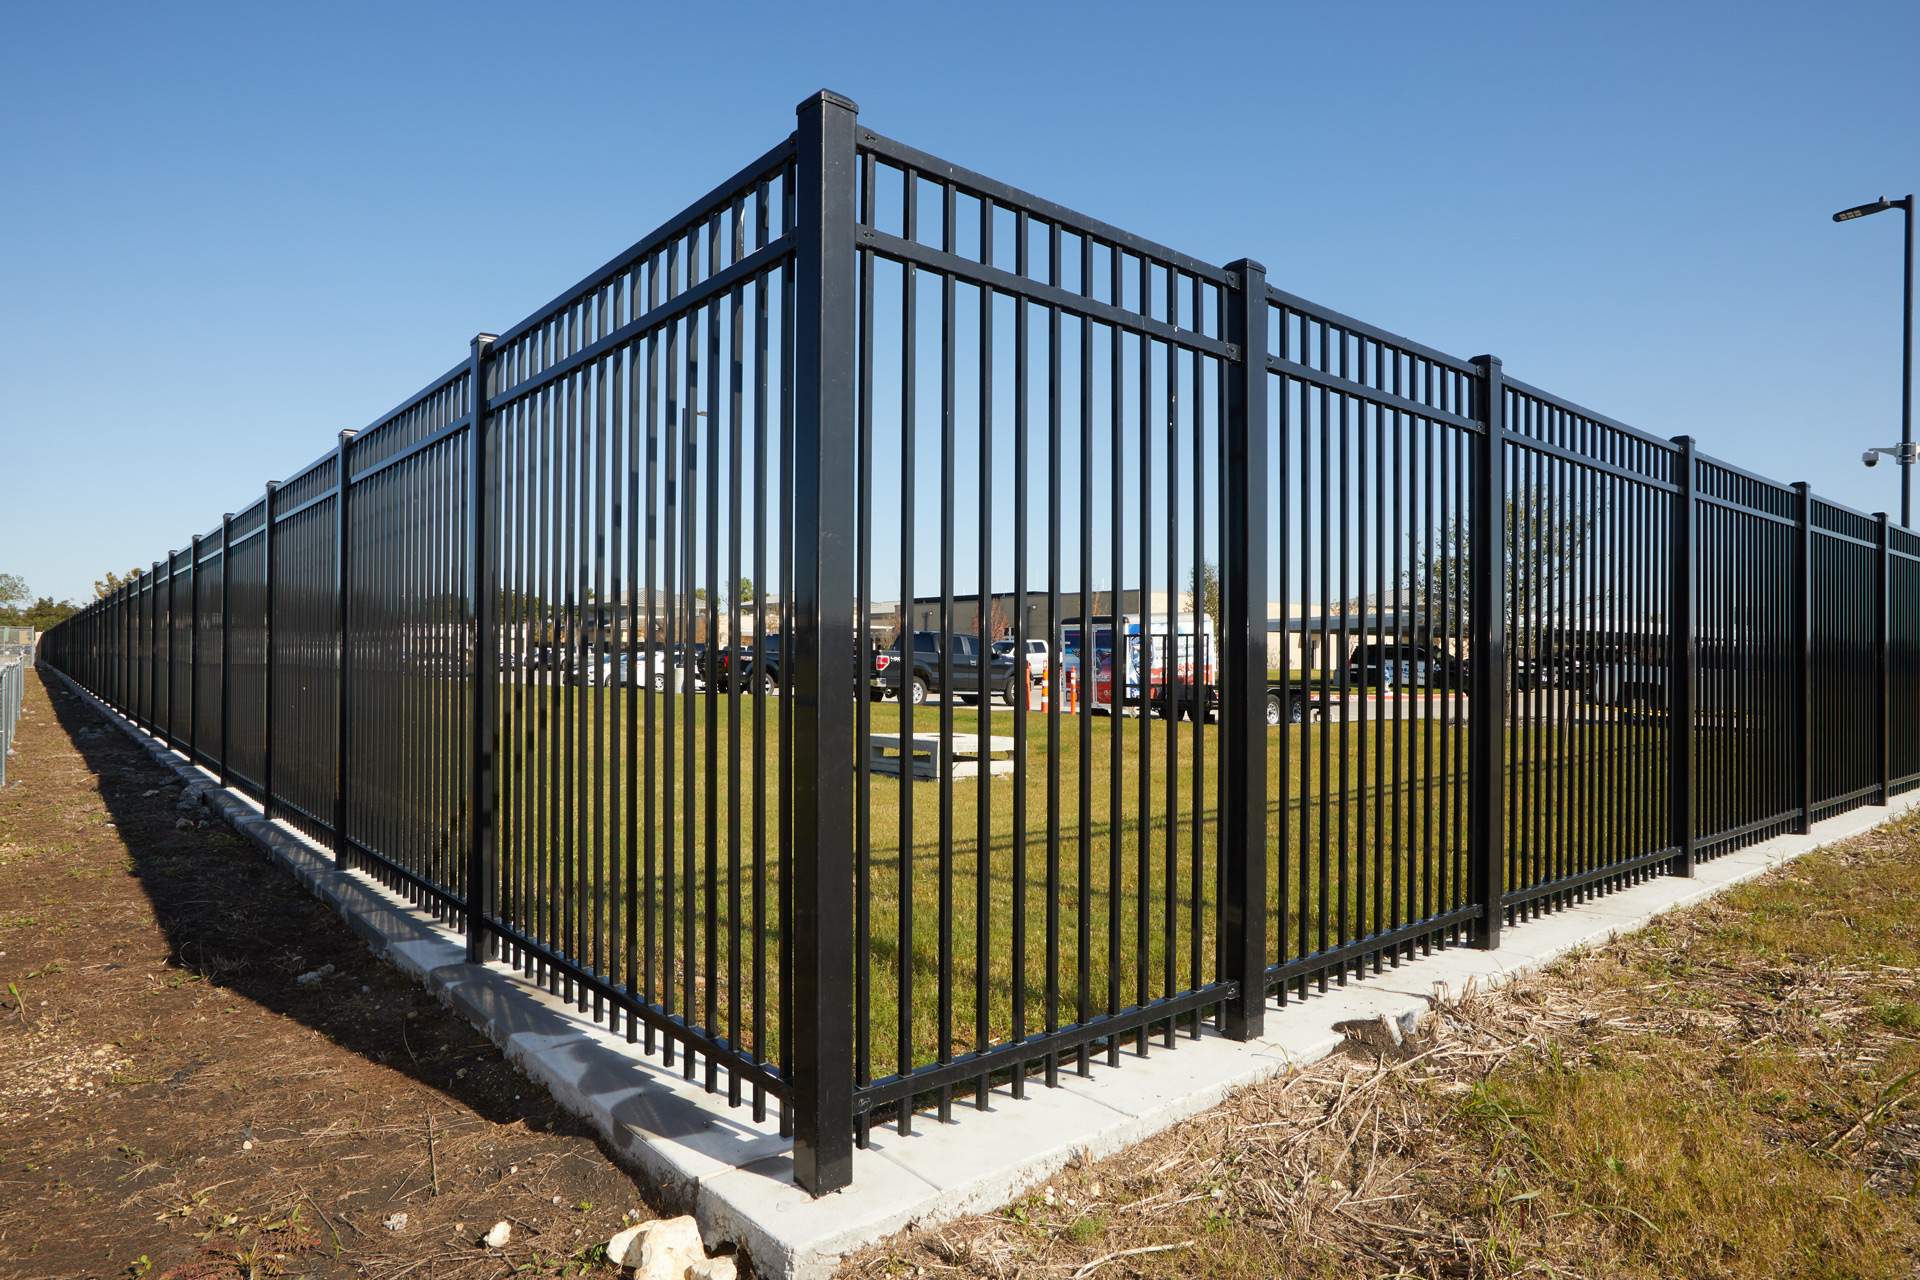 Tall metal fencing creates a secure perimeter around the parking lot. 